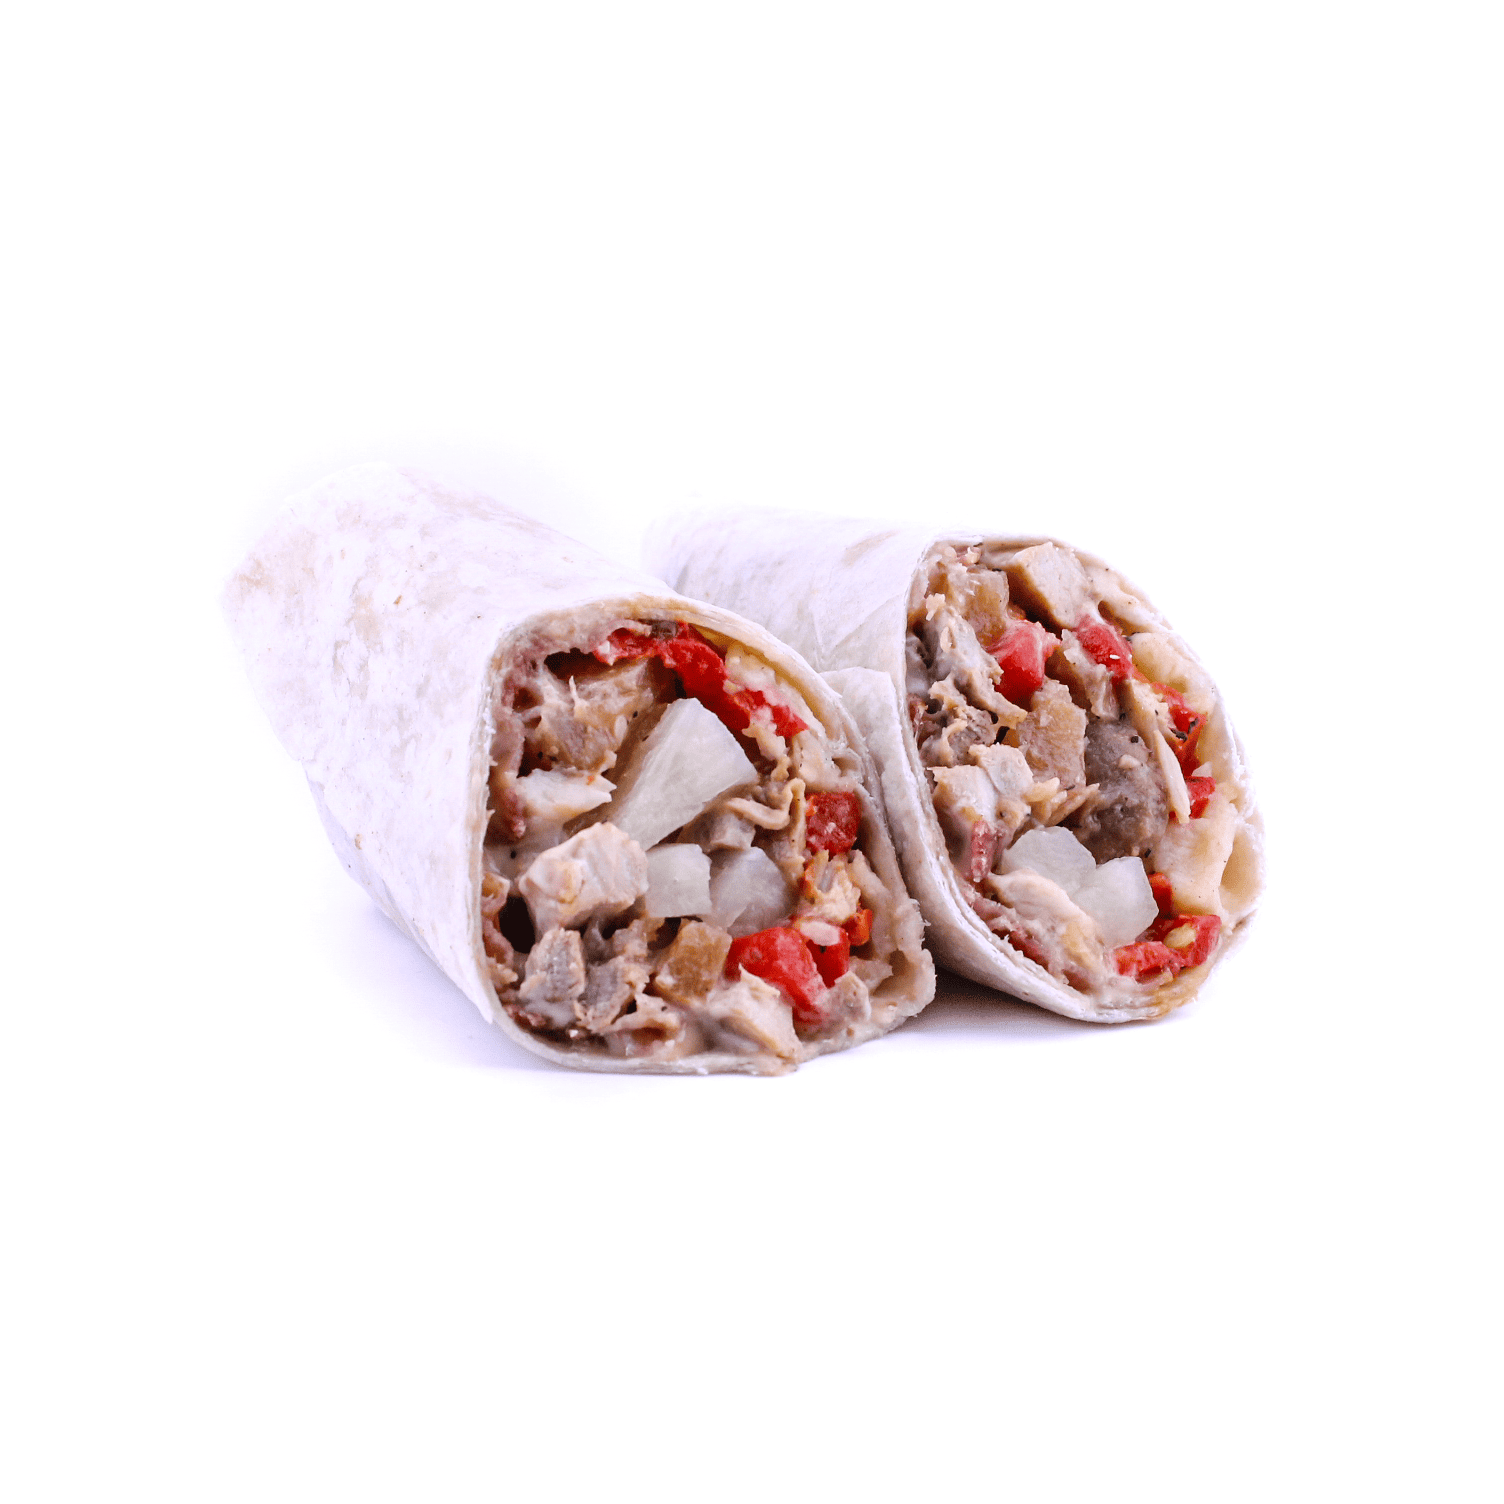 Aloha (Hot Wrap) - Teriyaki glazed chicken and pineapples, roasted red peppers, bacon, Swiss cheese, caramelized onion aioli wrapped in a flour tortilla